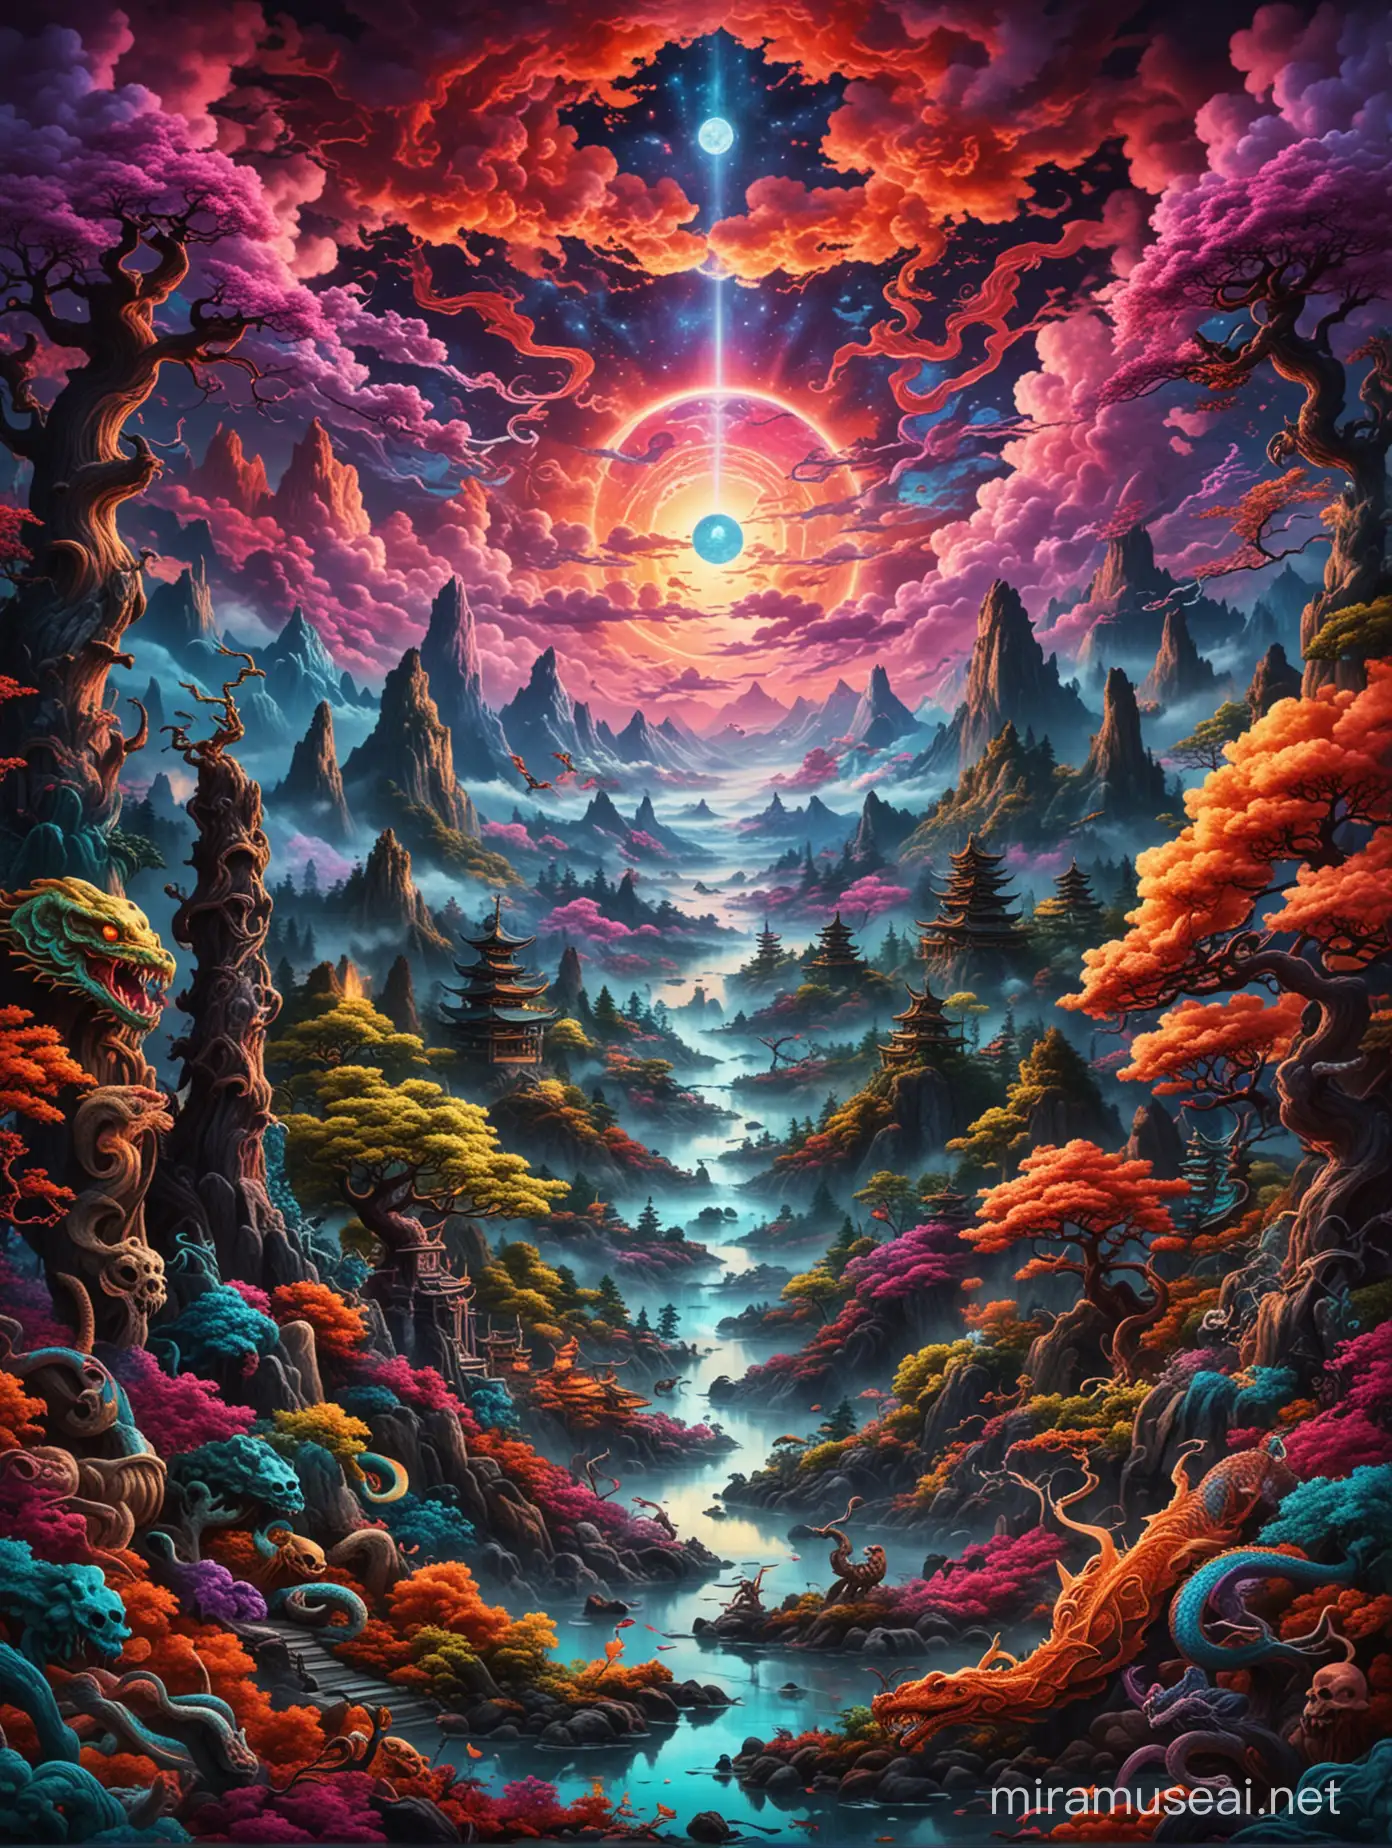 Psychedelic visionary world, vivid colors with japness clouds , dragon, snake , forest tress, dead skulls, mountains, third eye energy both side lamp down side fully dark hell world 